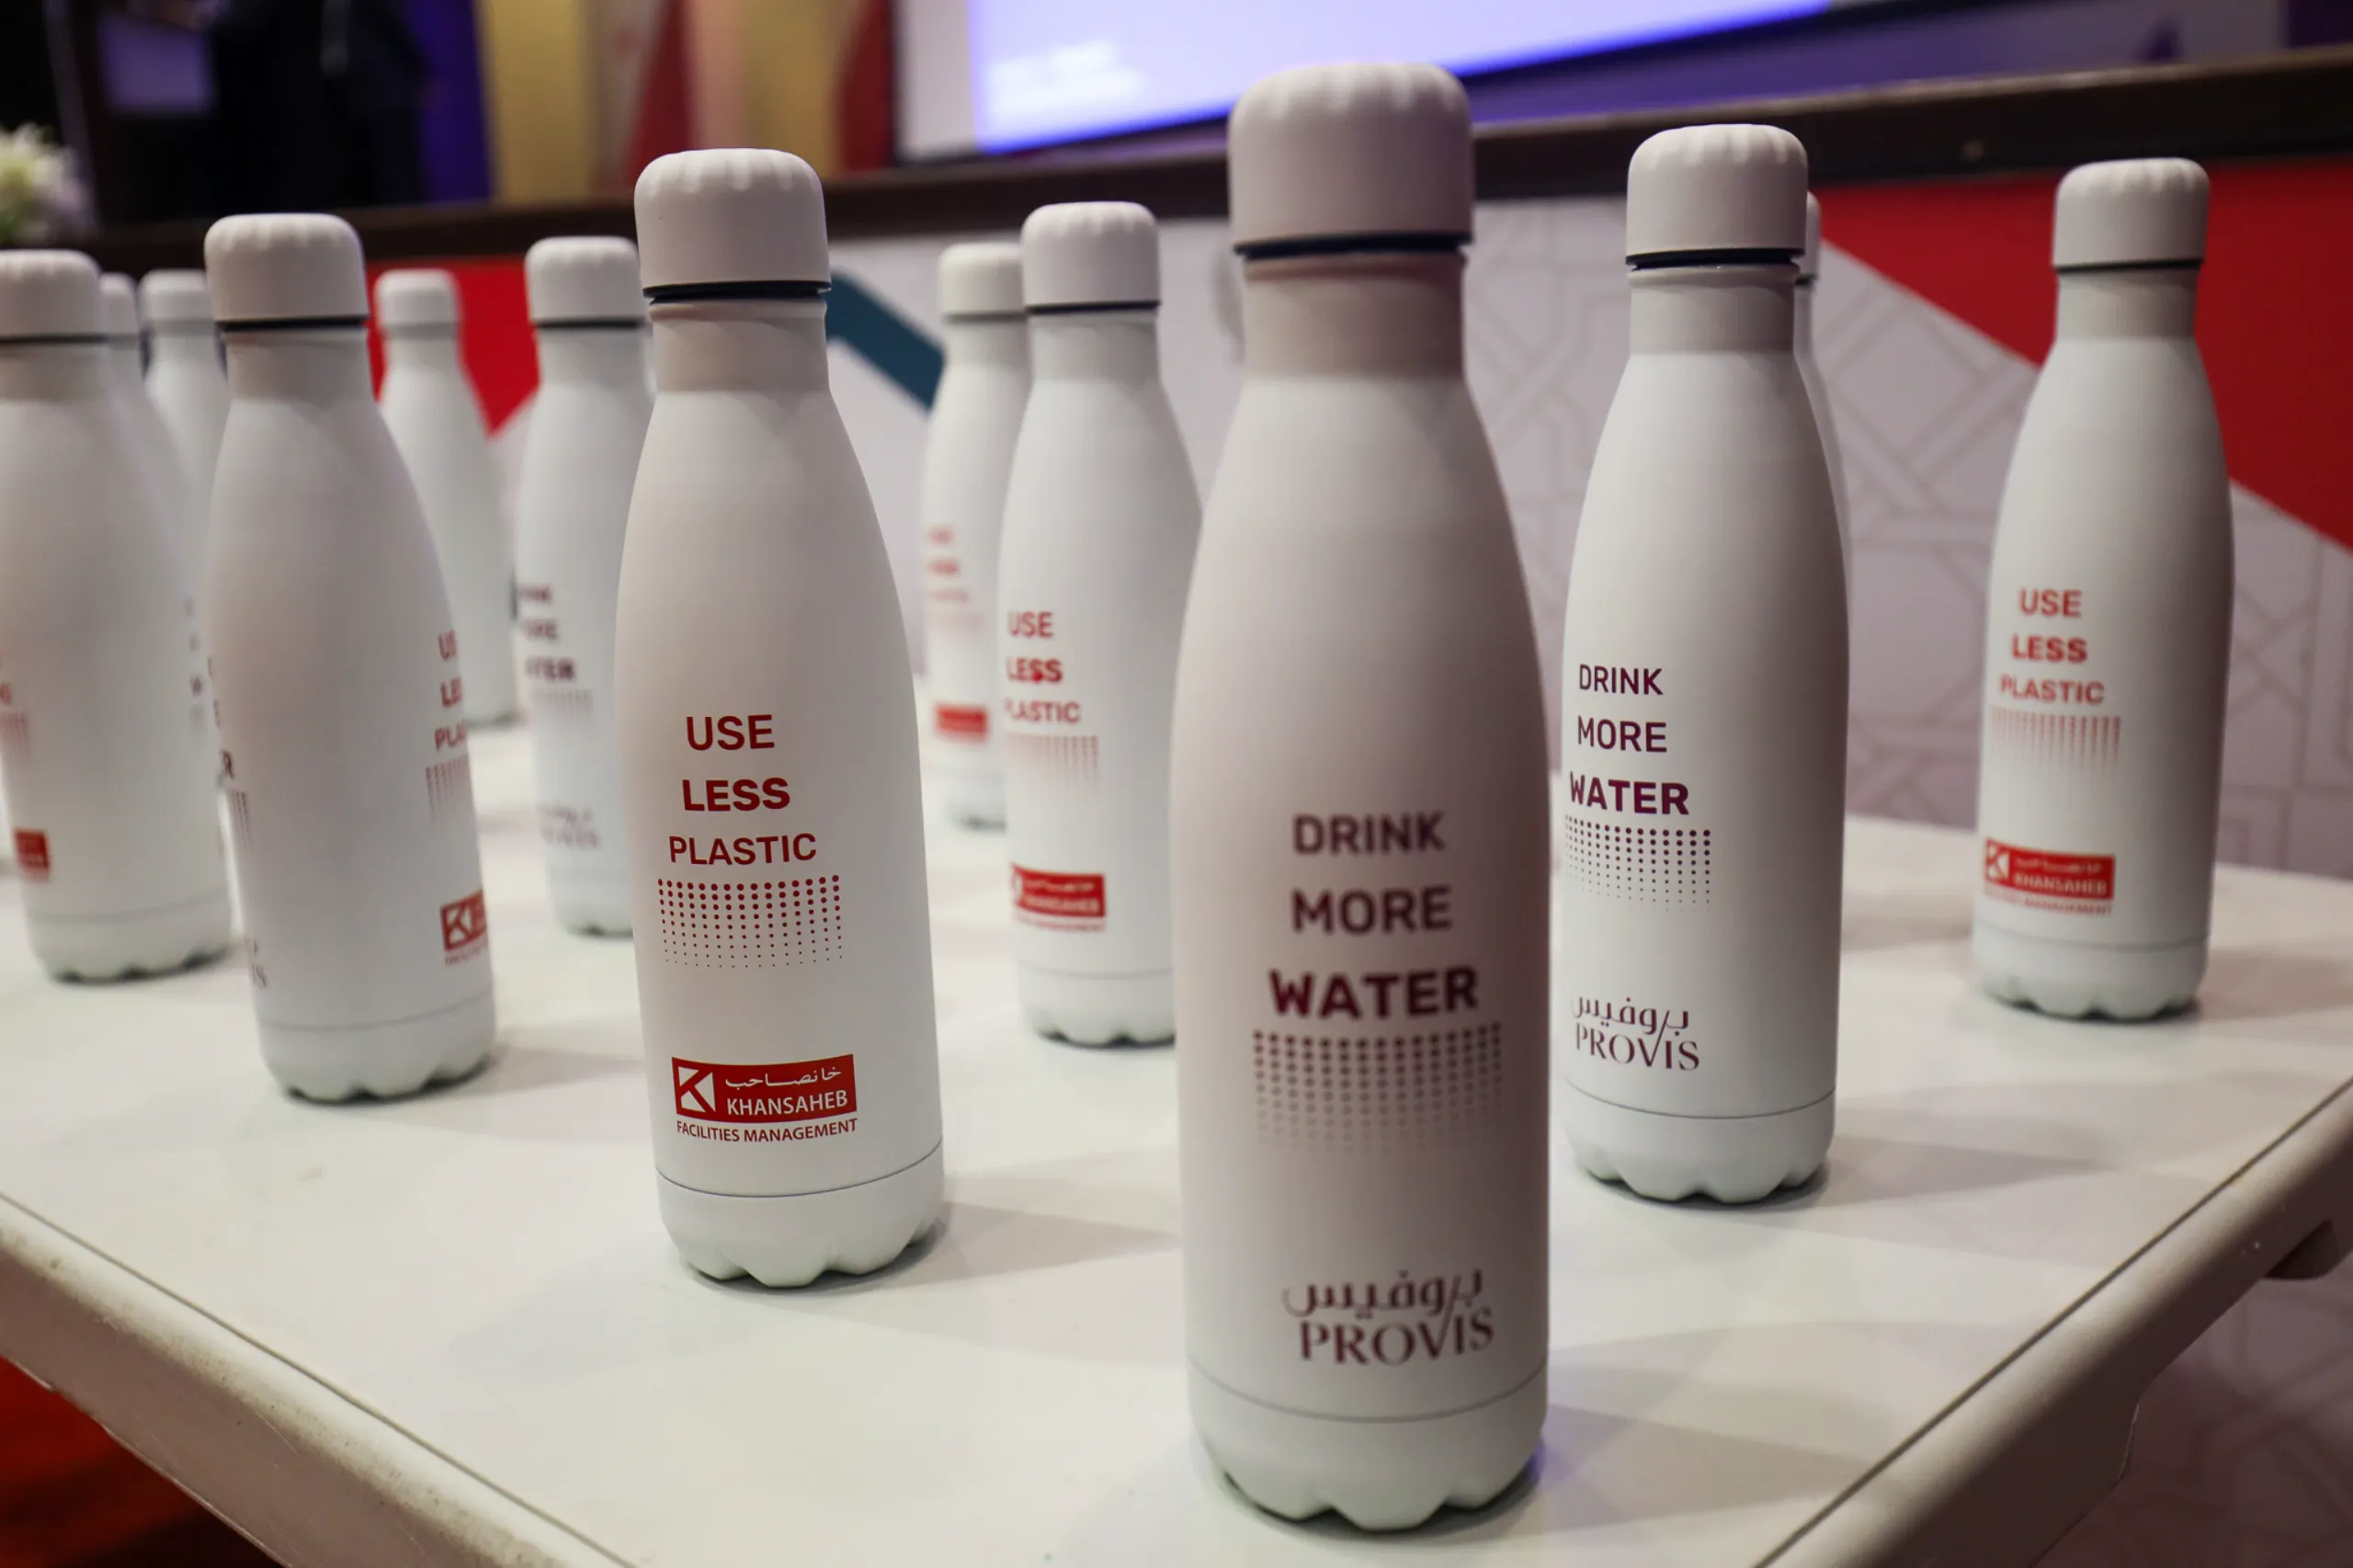 Khansaheb FM Collaborates with Provis to Rollout ‘Less Plastic, More Water’ Initiative